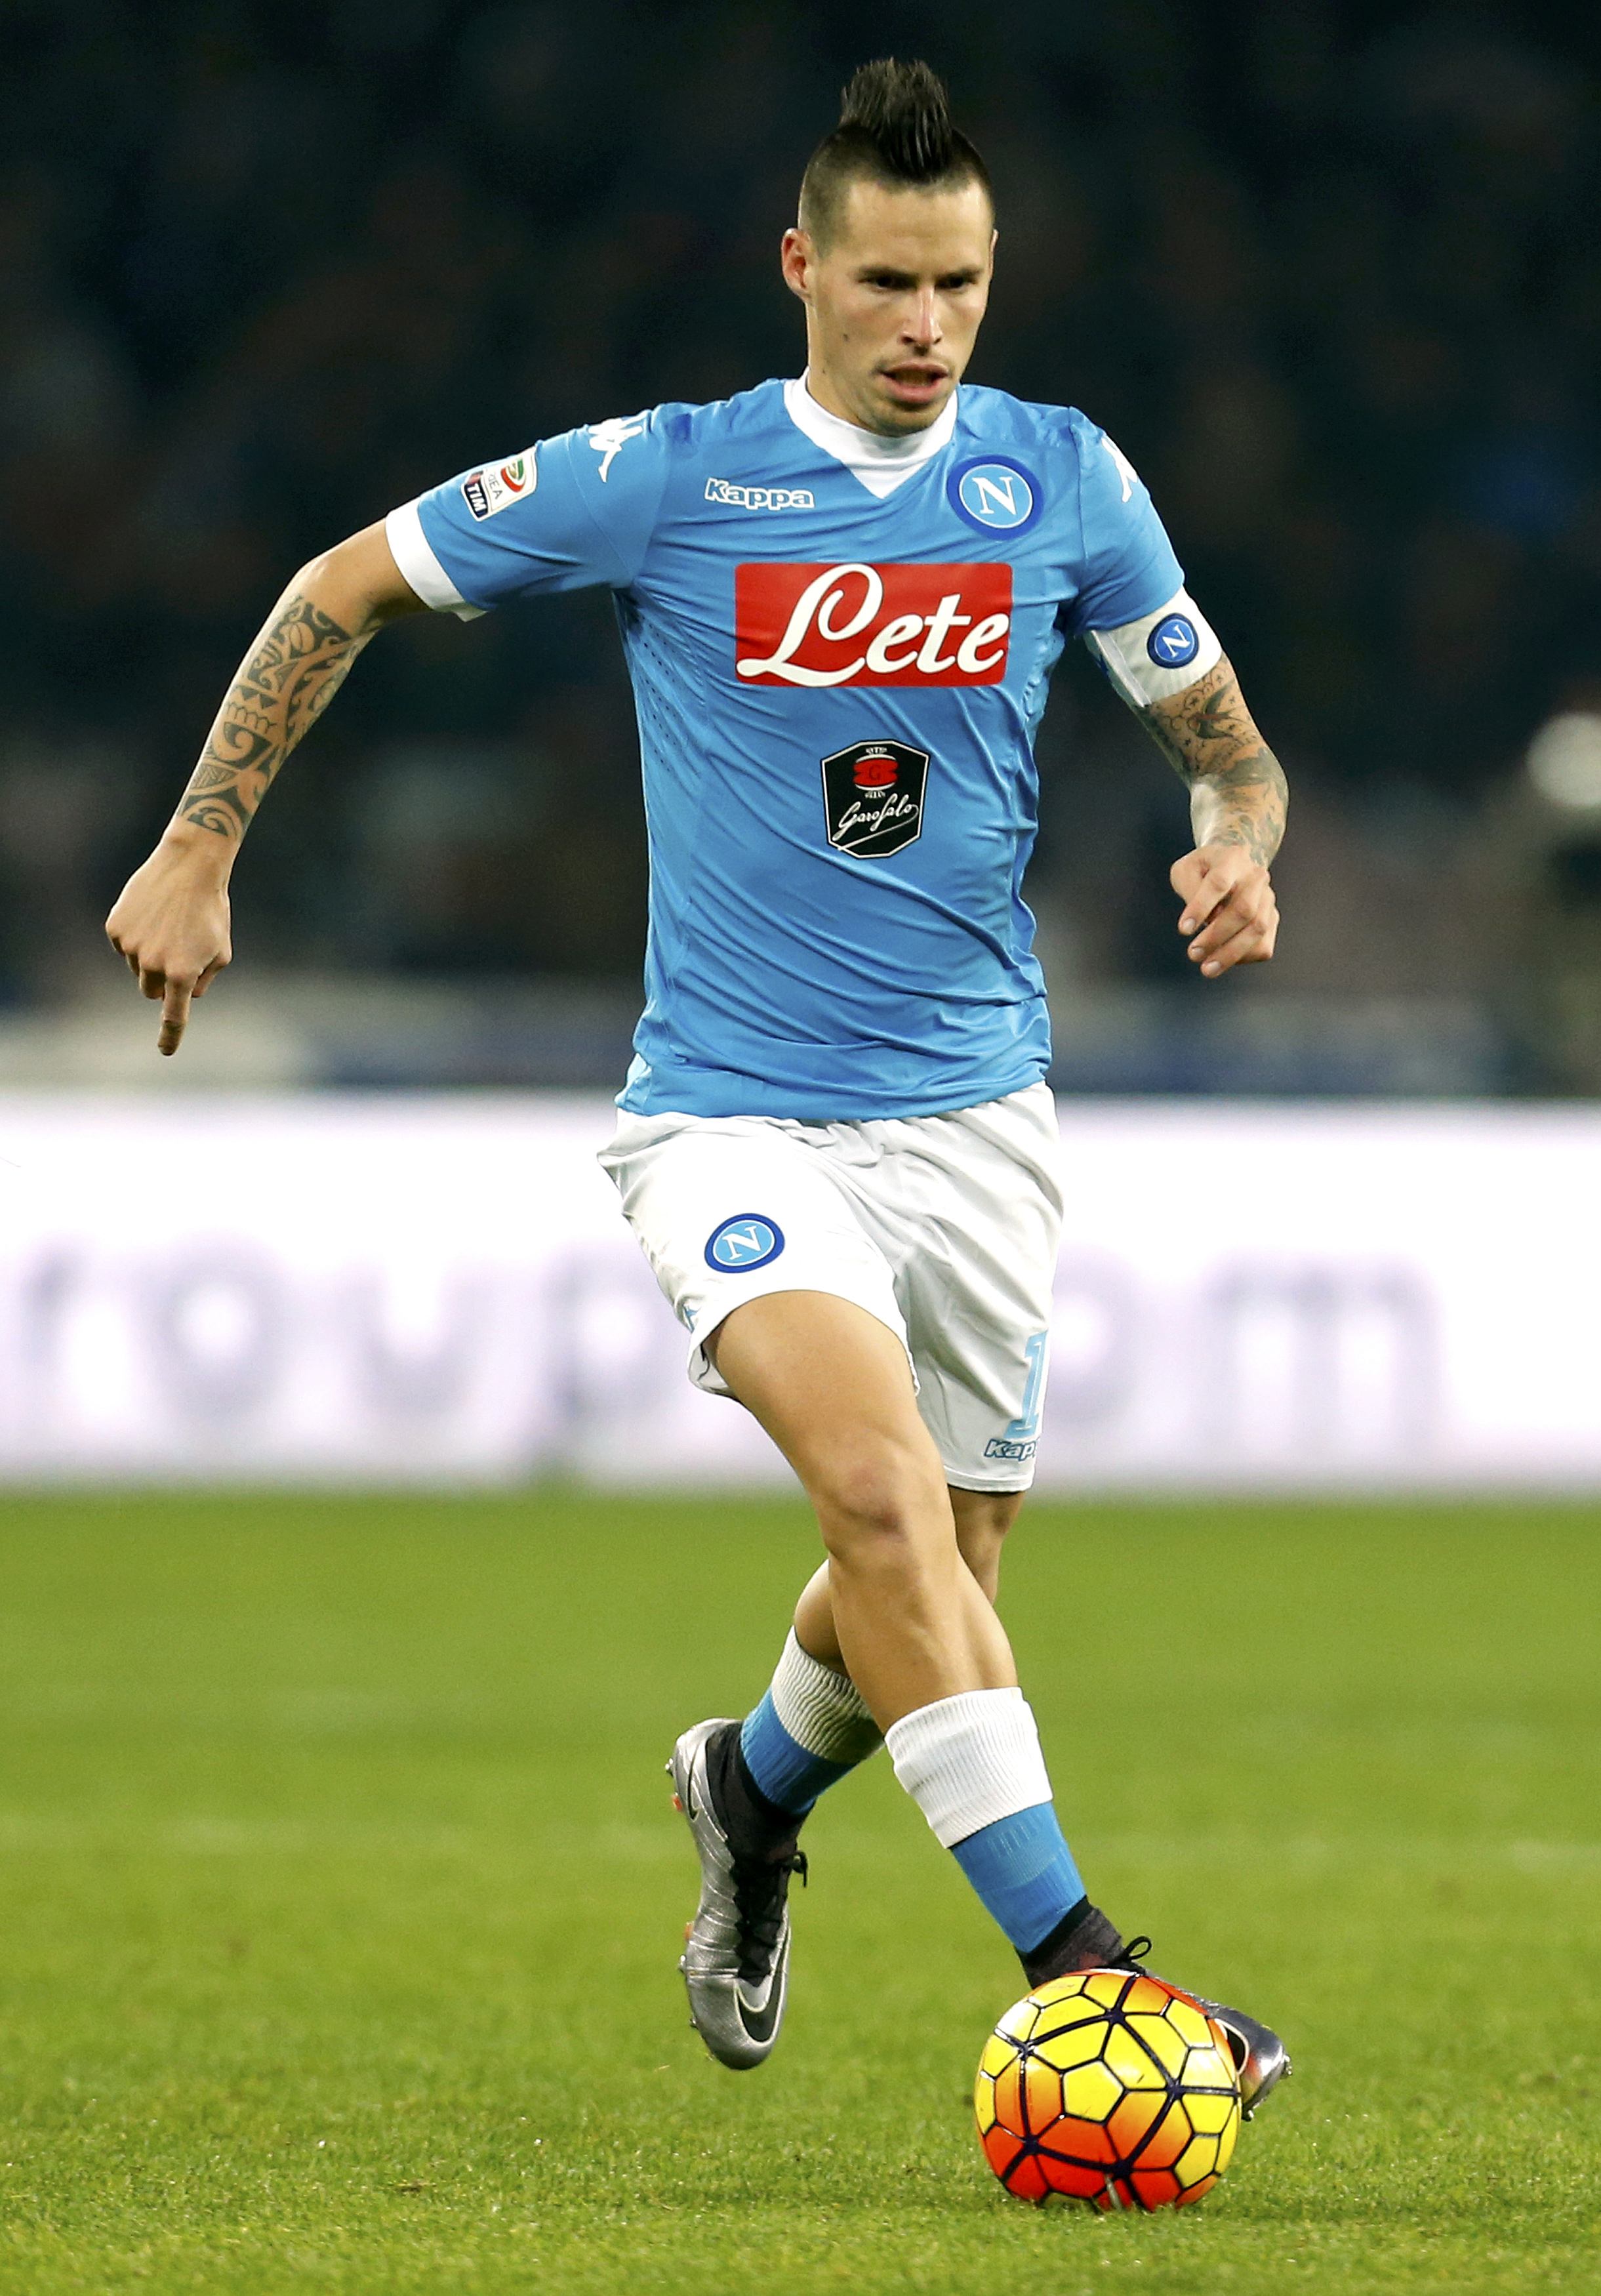 SSC Napoli Marek Hamsik in action against AS Roma